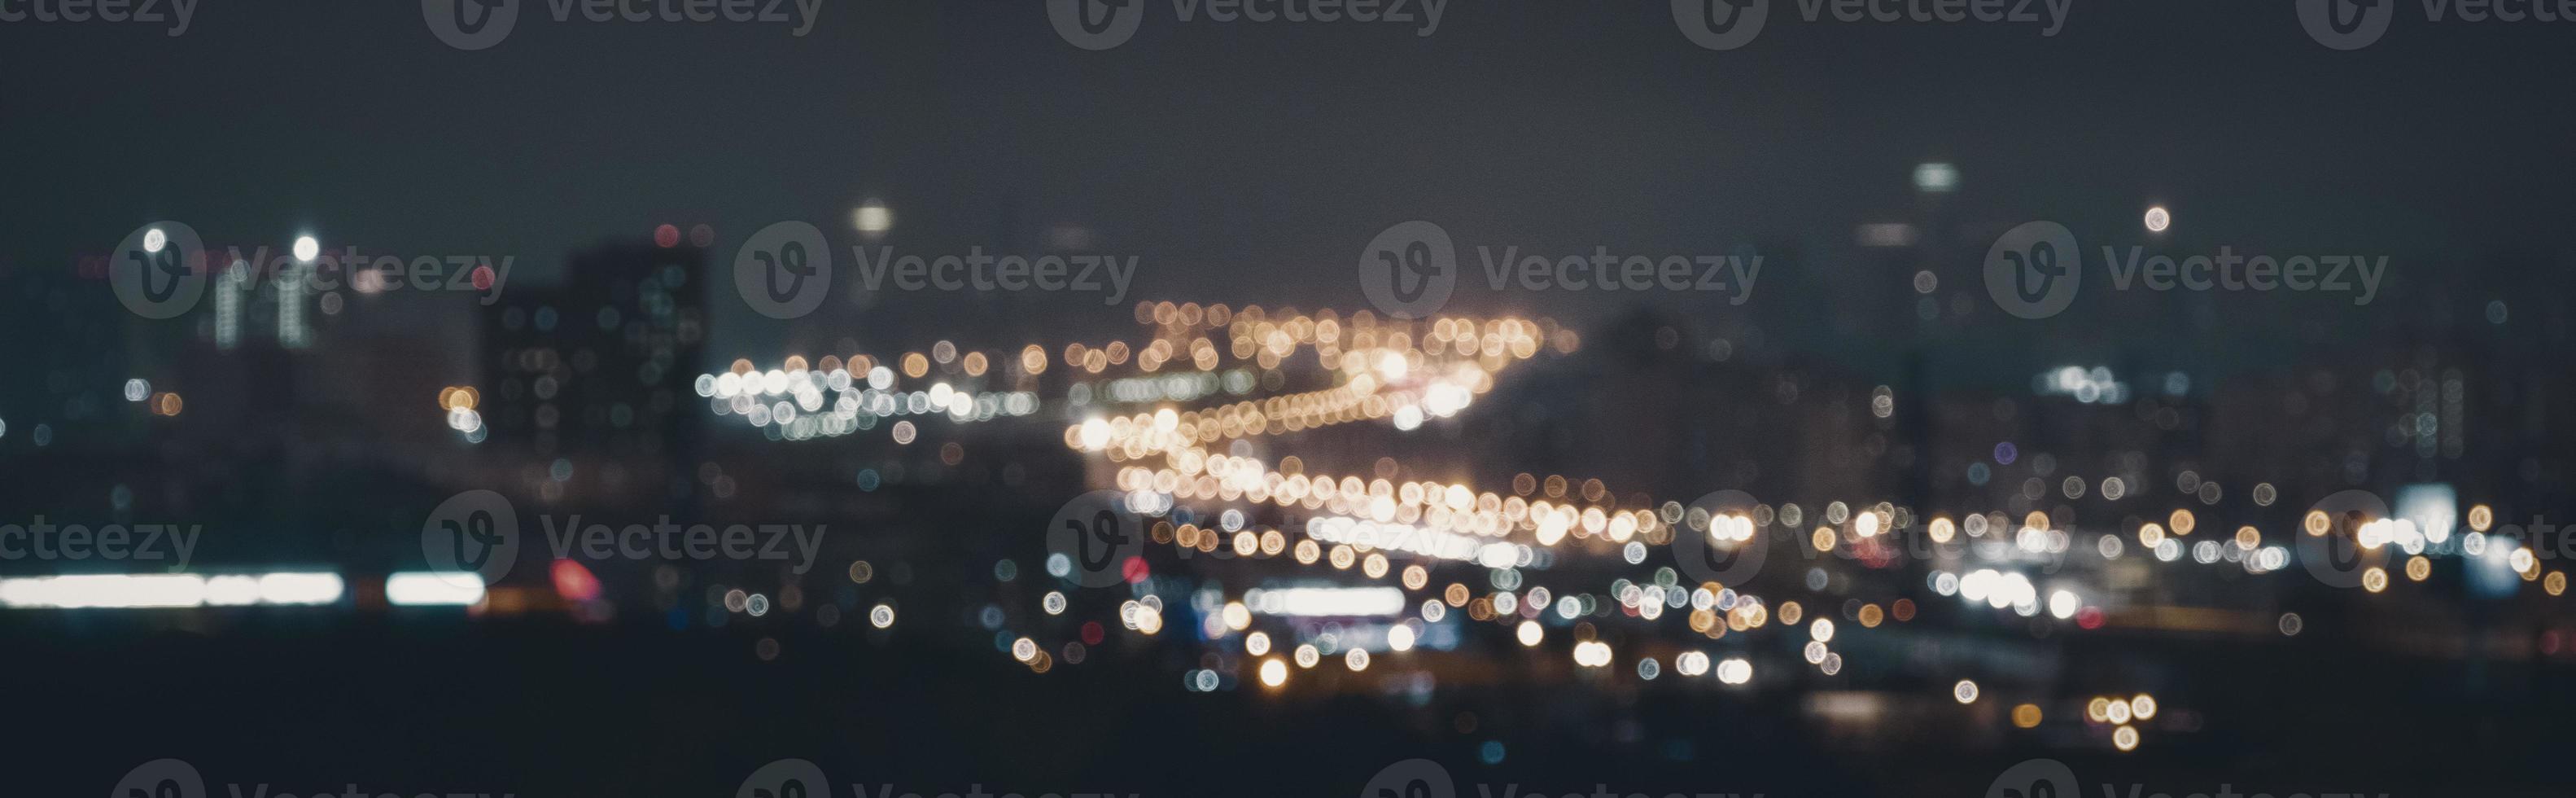 Blurry lights of road traffic at night, abstract unfocused cityscape background photo